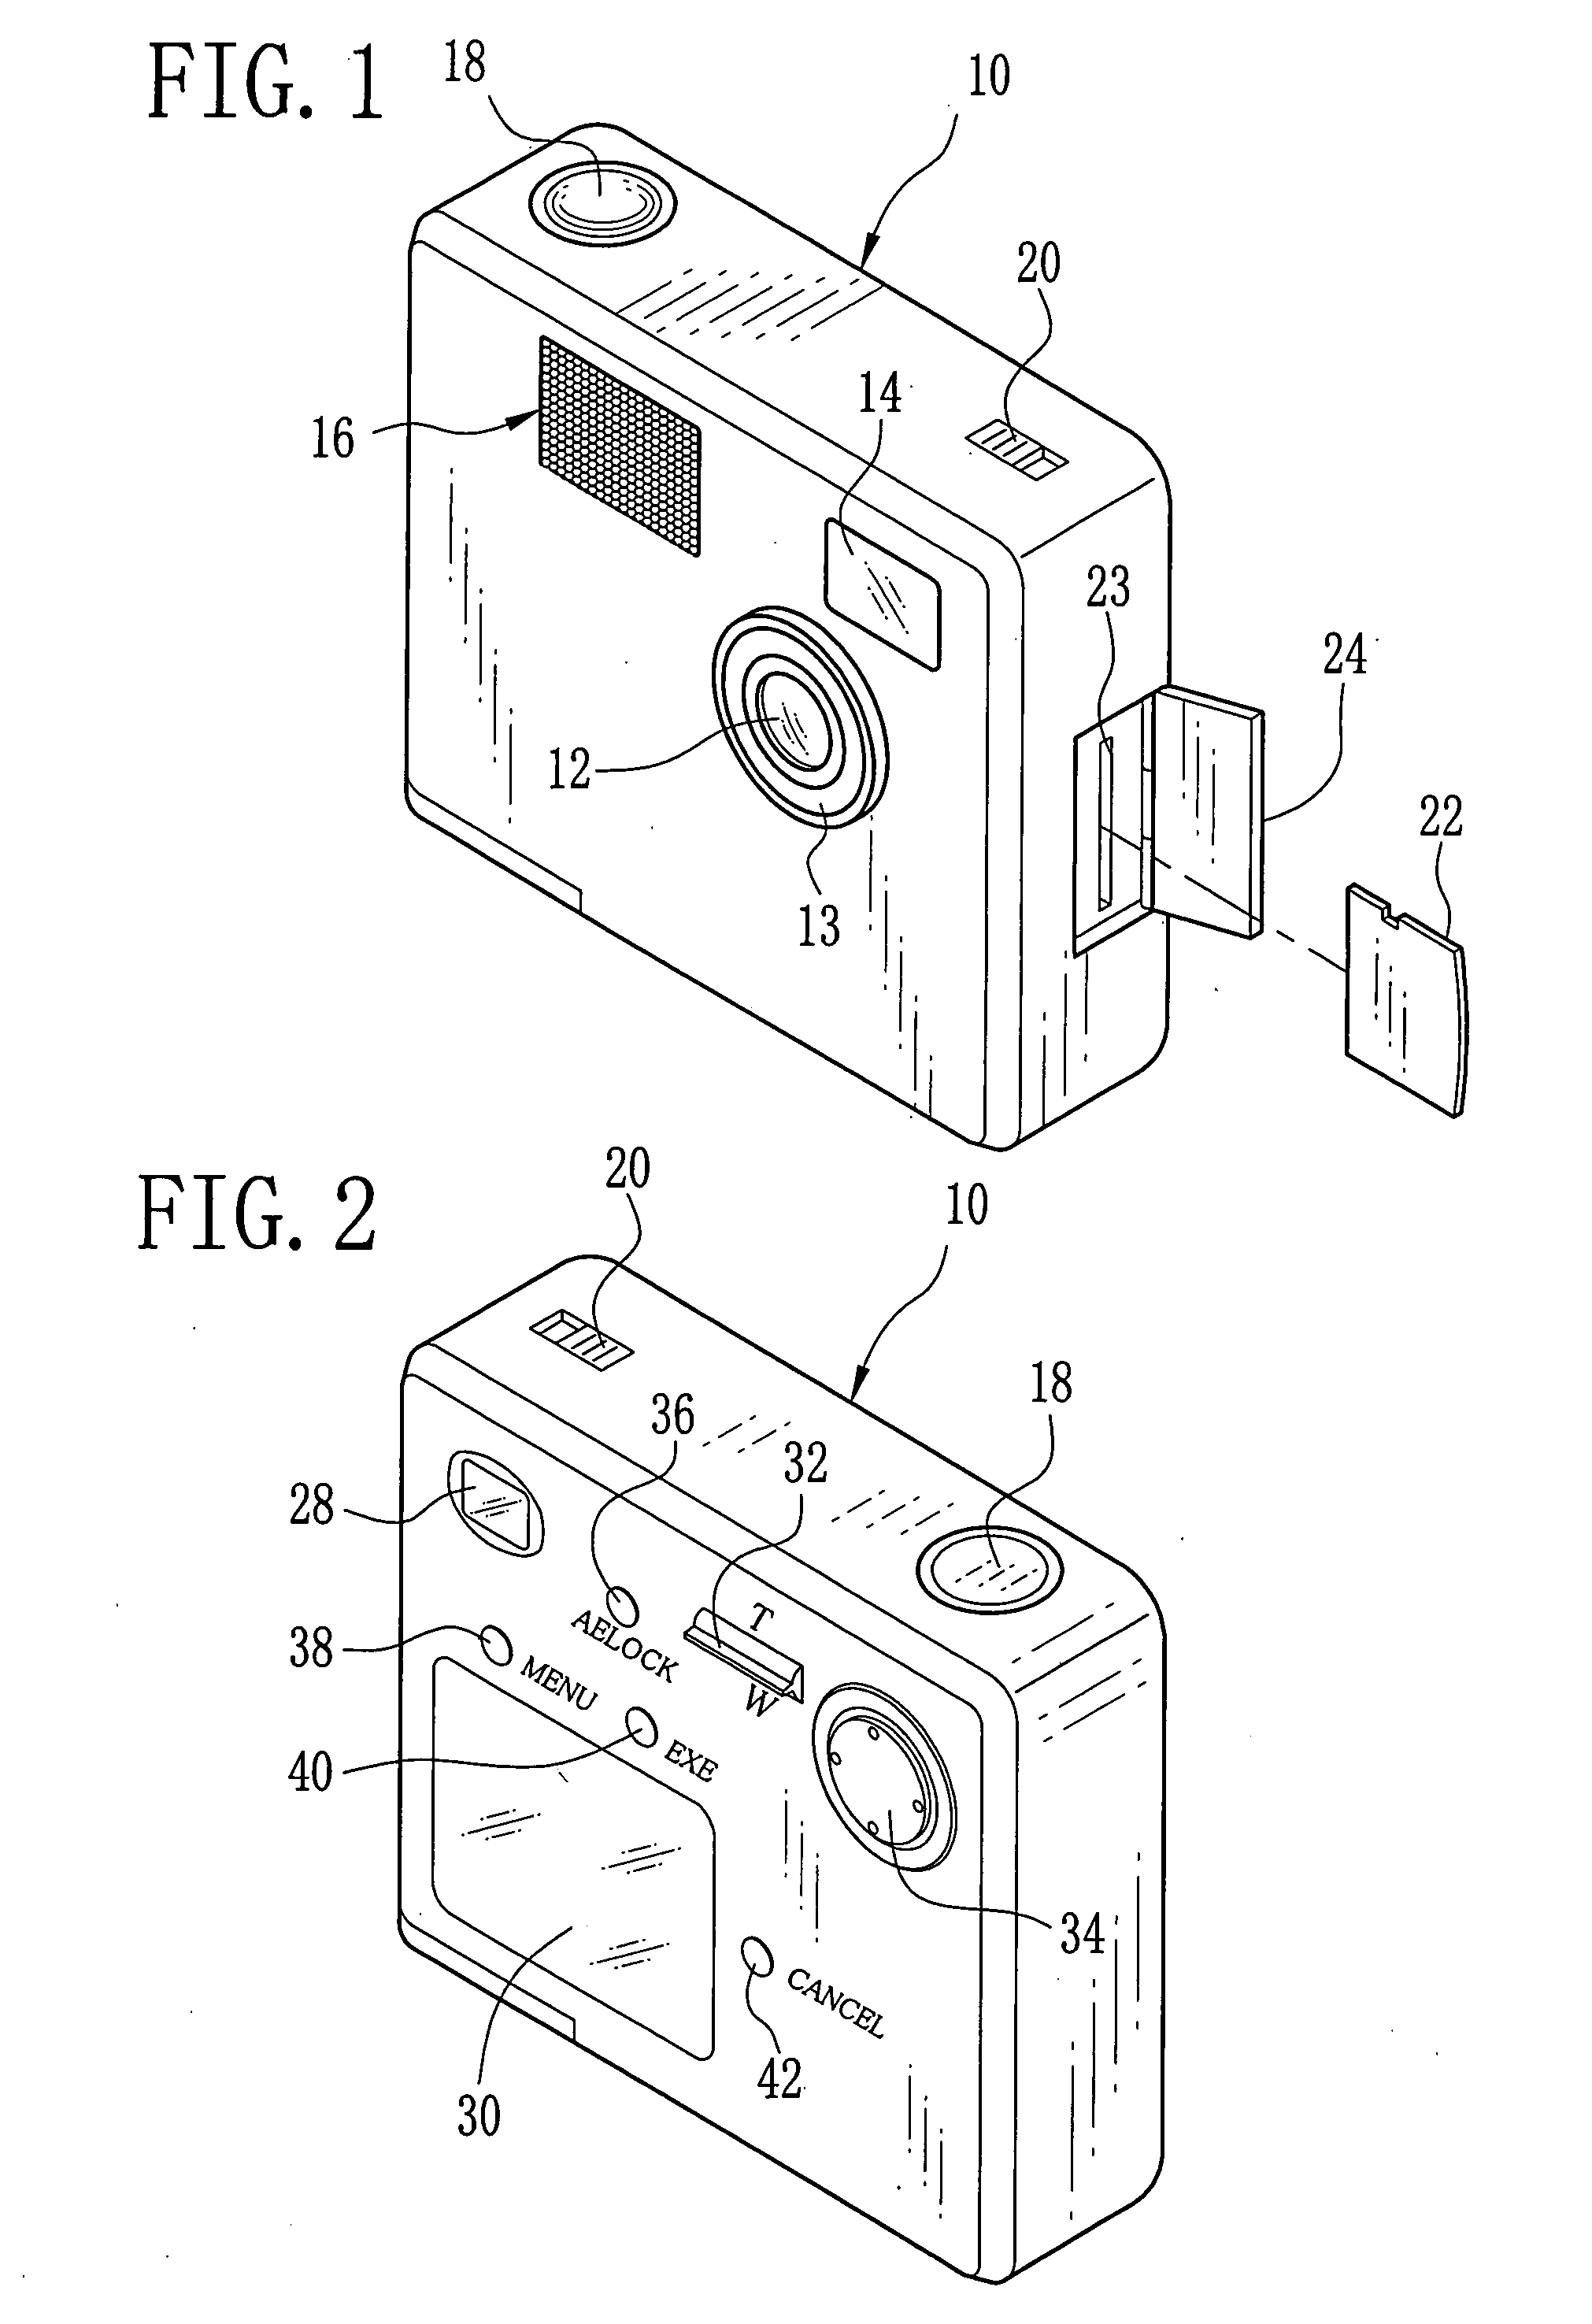 Image capturing apparatus with flash device